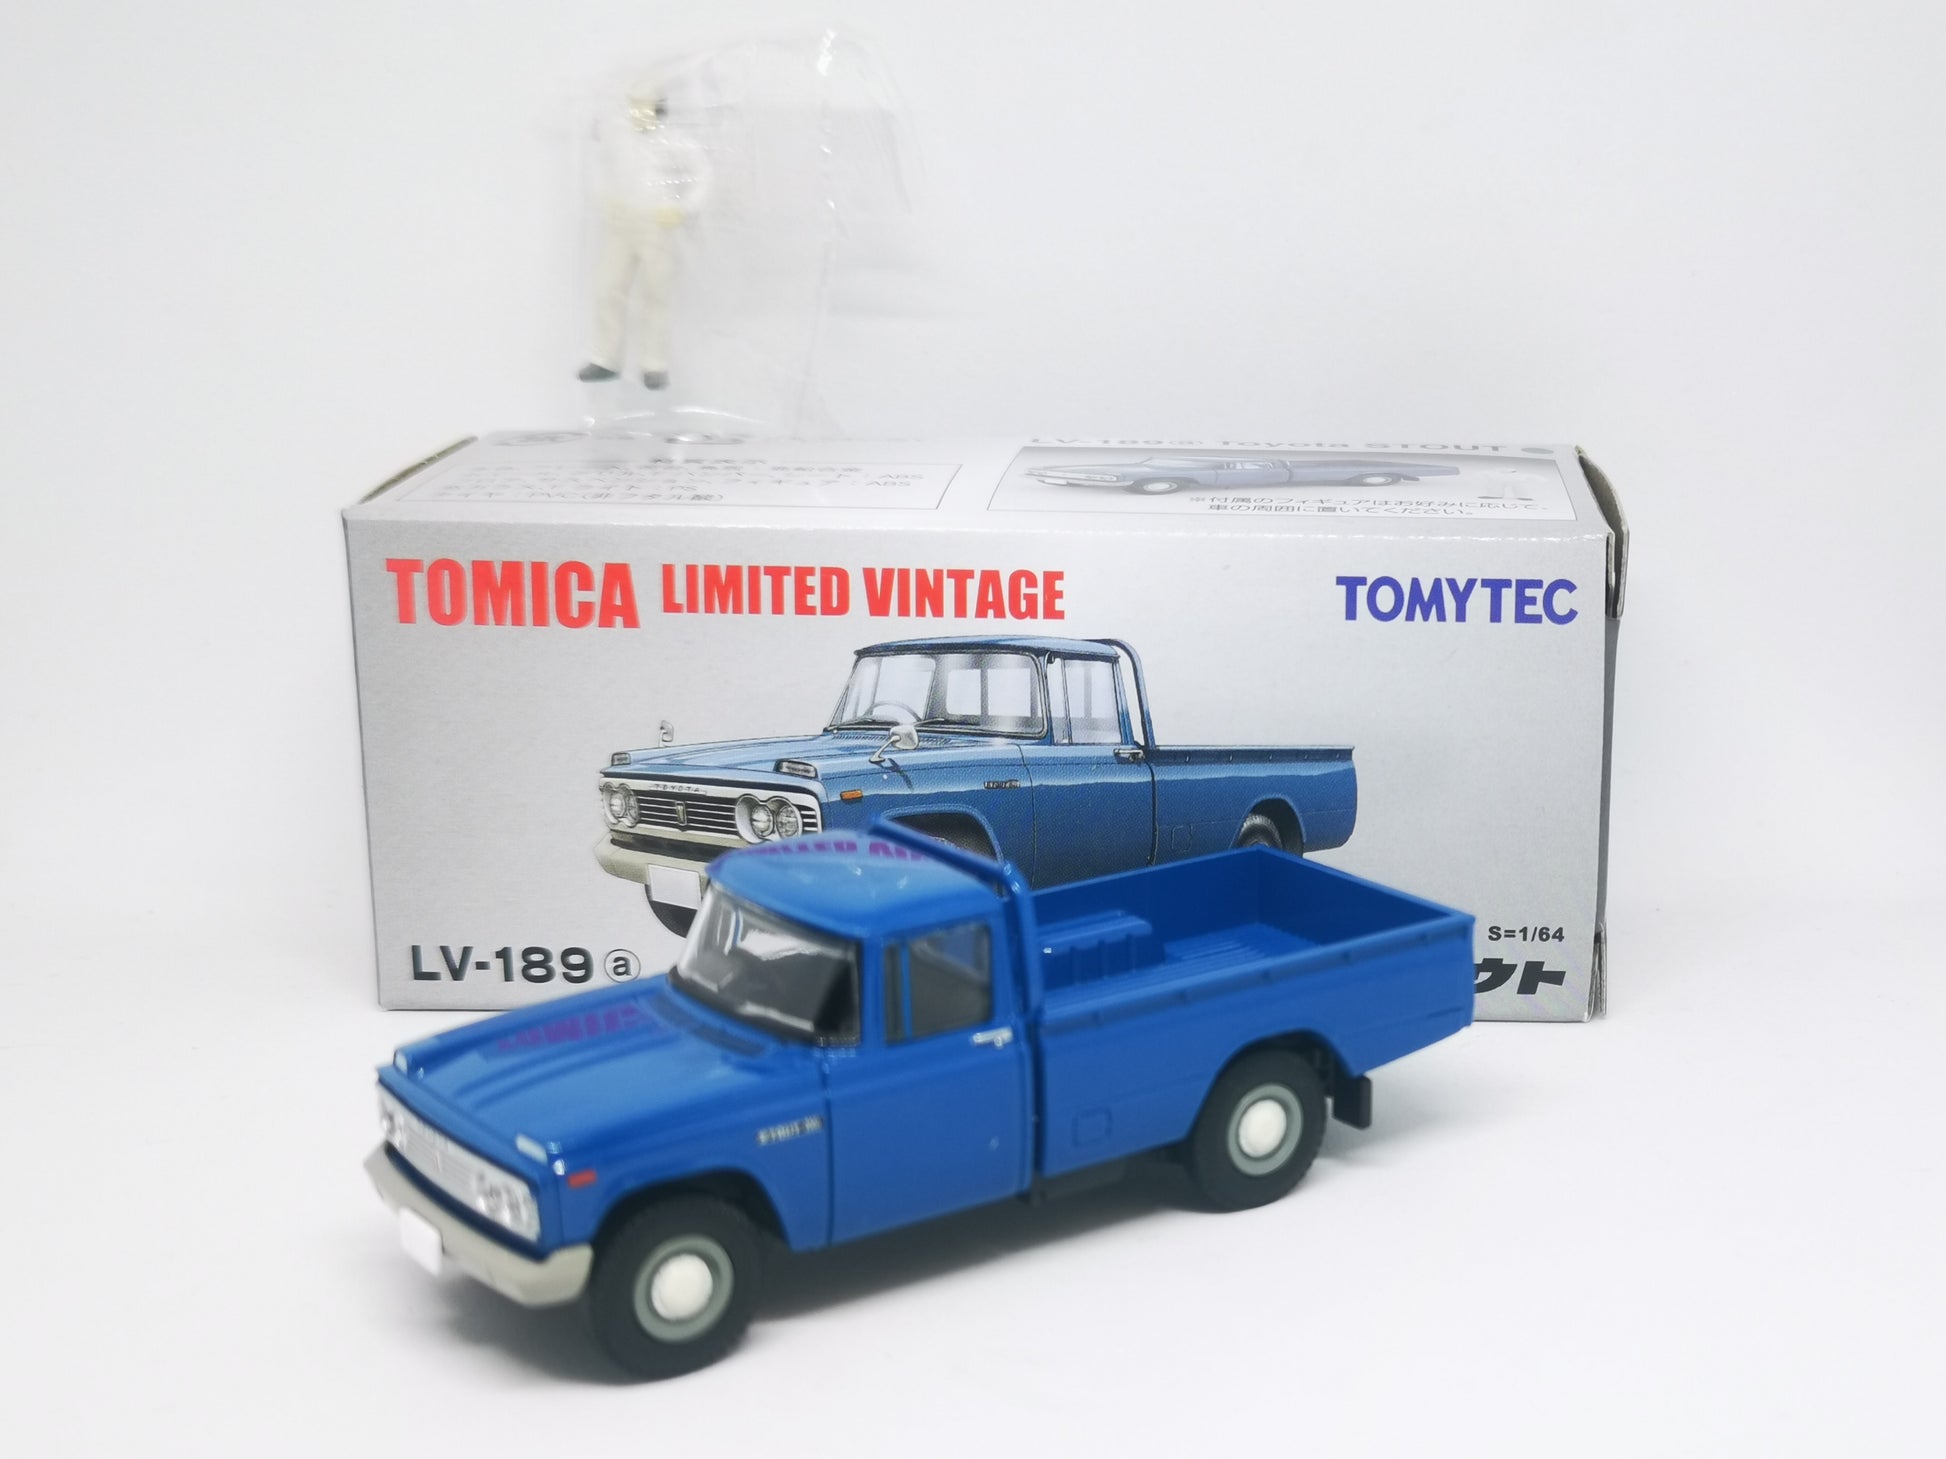 this just came in from the mail. tomica limited vintage toyota